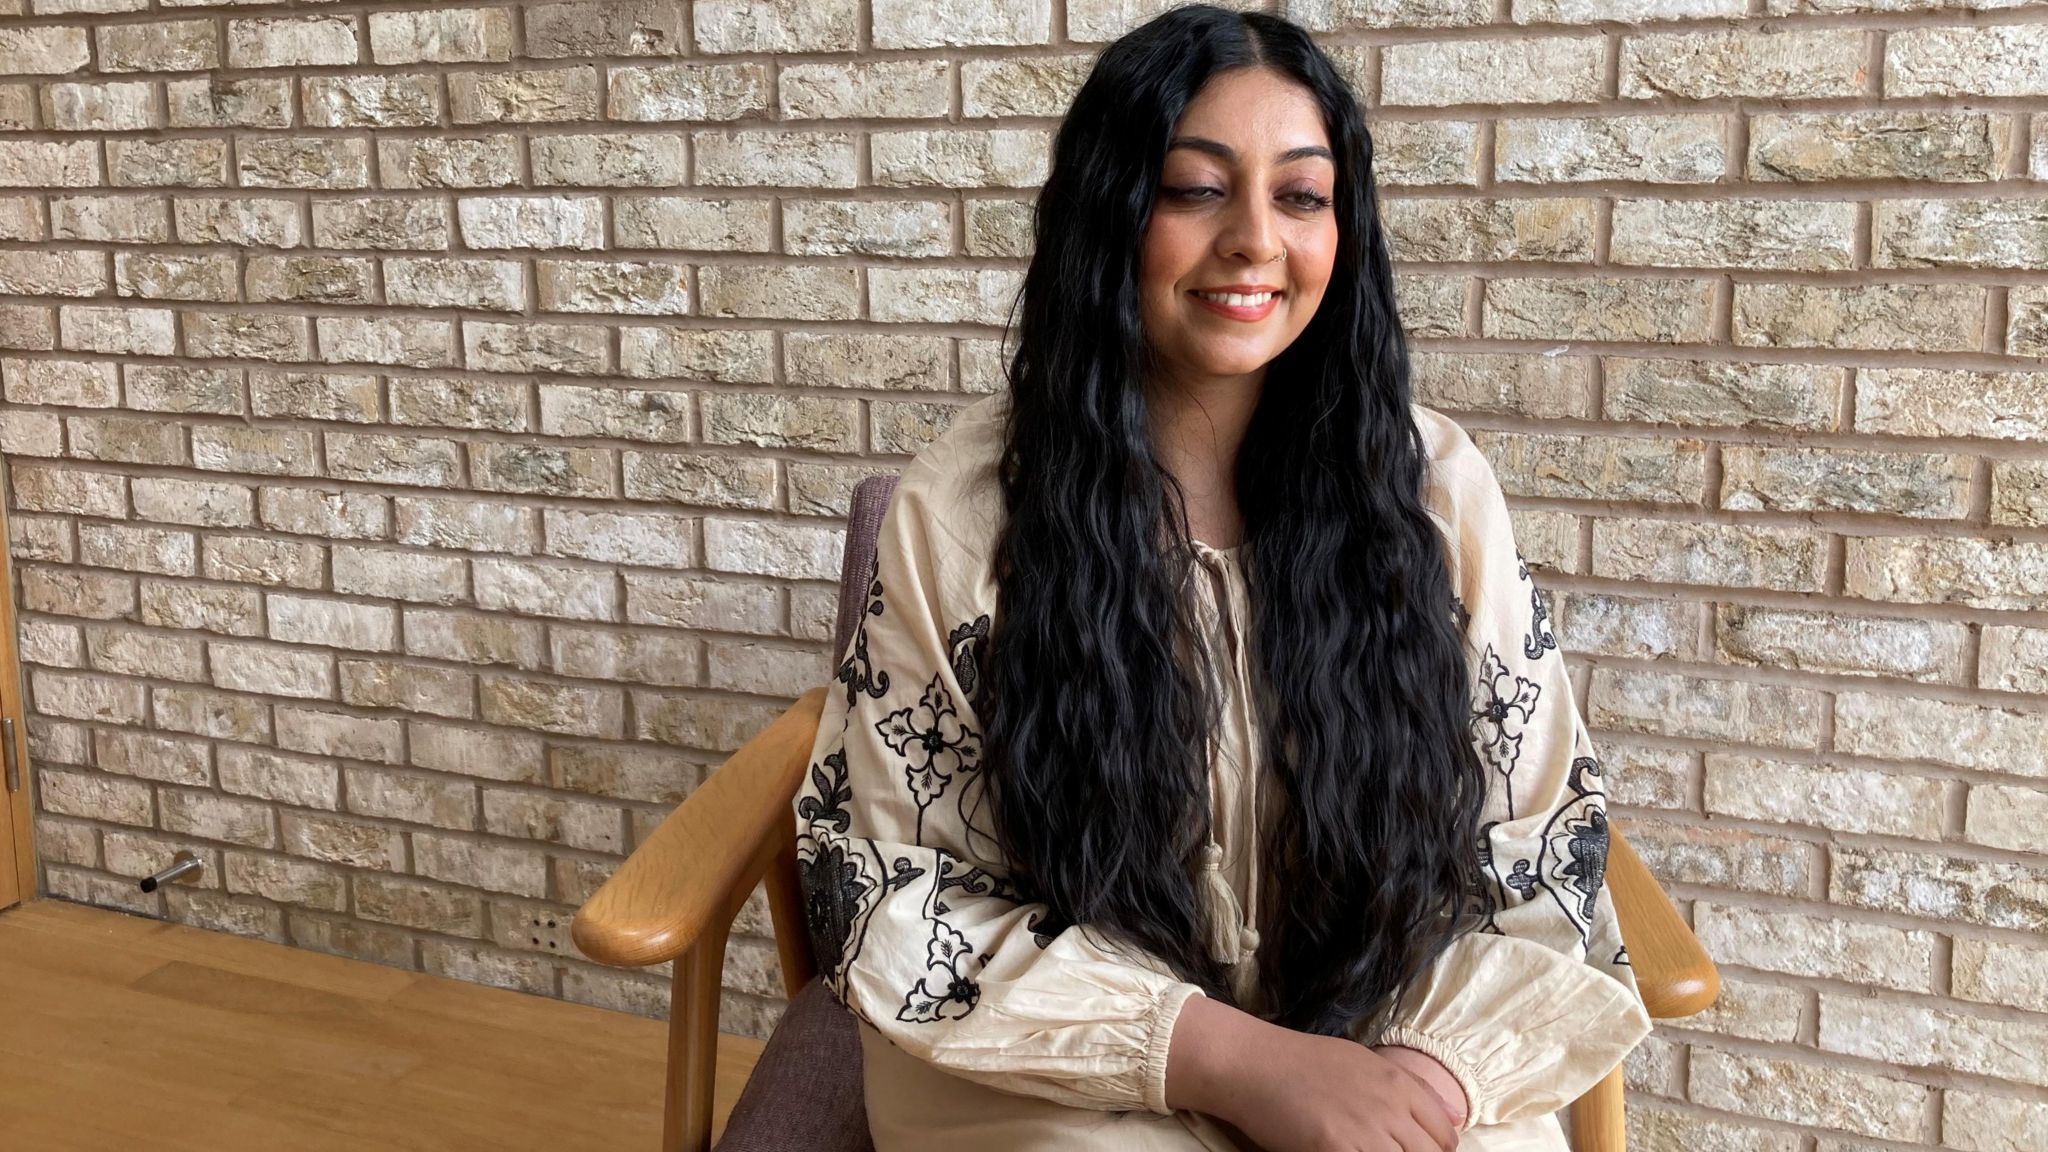 Waseema Shaikh wears a white blouse with blue embroidered floral detailing, sitting in a wooden chair with a brick wall in the background 